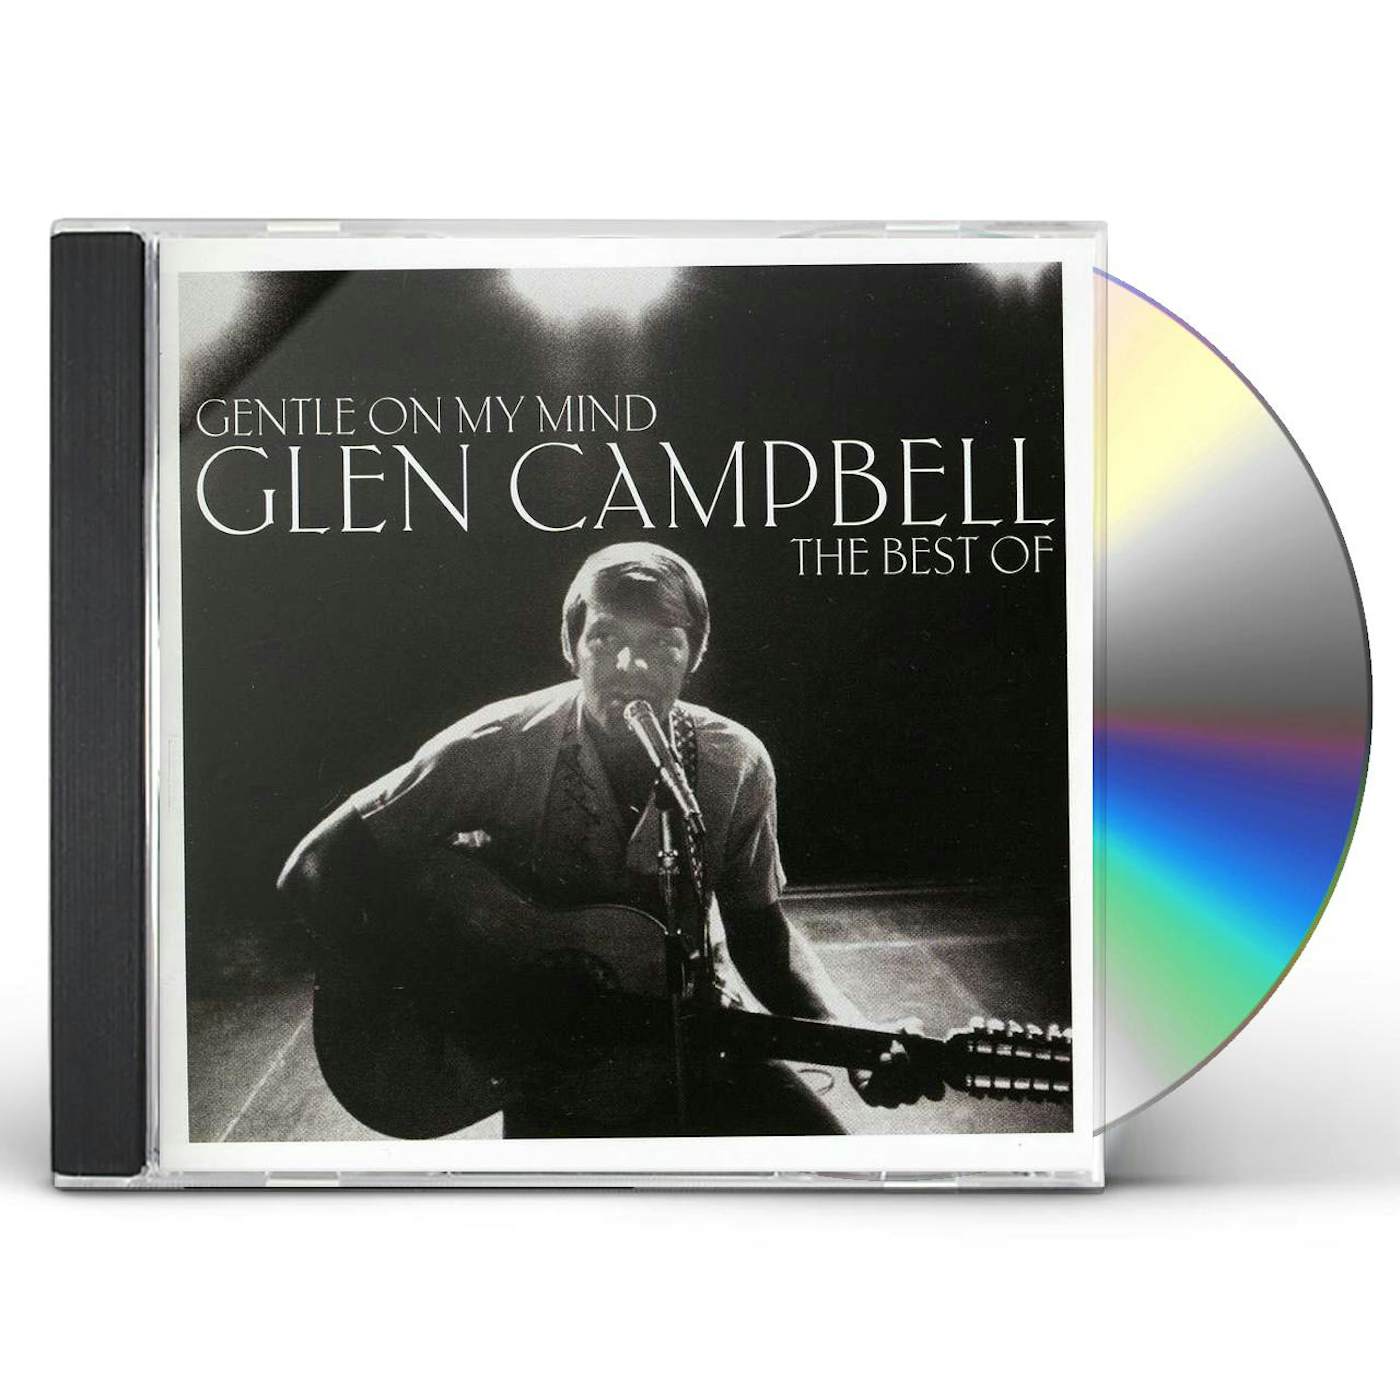 Glen Campbell GENTLE ON MY MIND: THE BEST OF CD